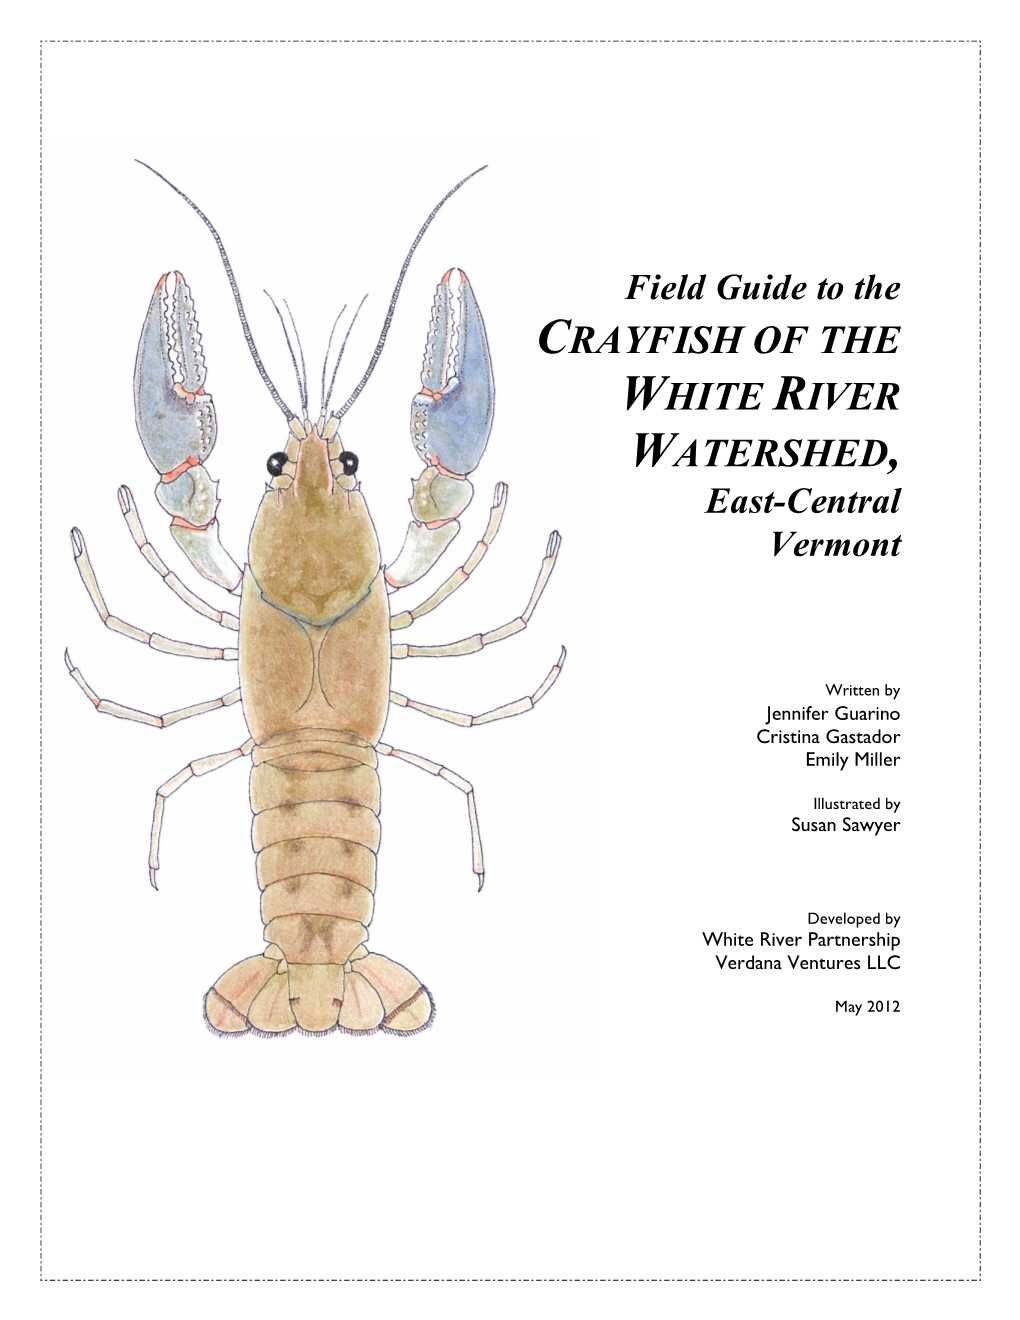 Field Guide to the CRAYFISH of the WHITE RIVER WATERSHED, East-Central Vermont